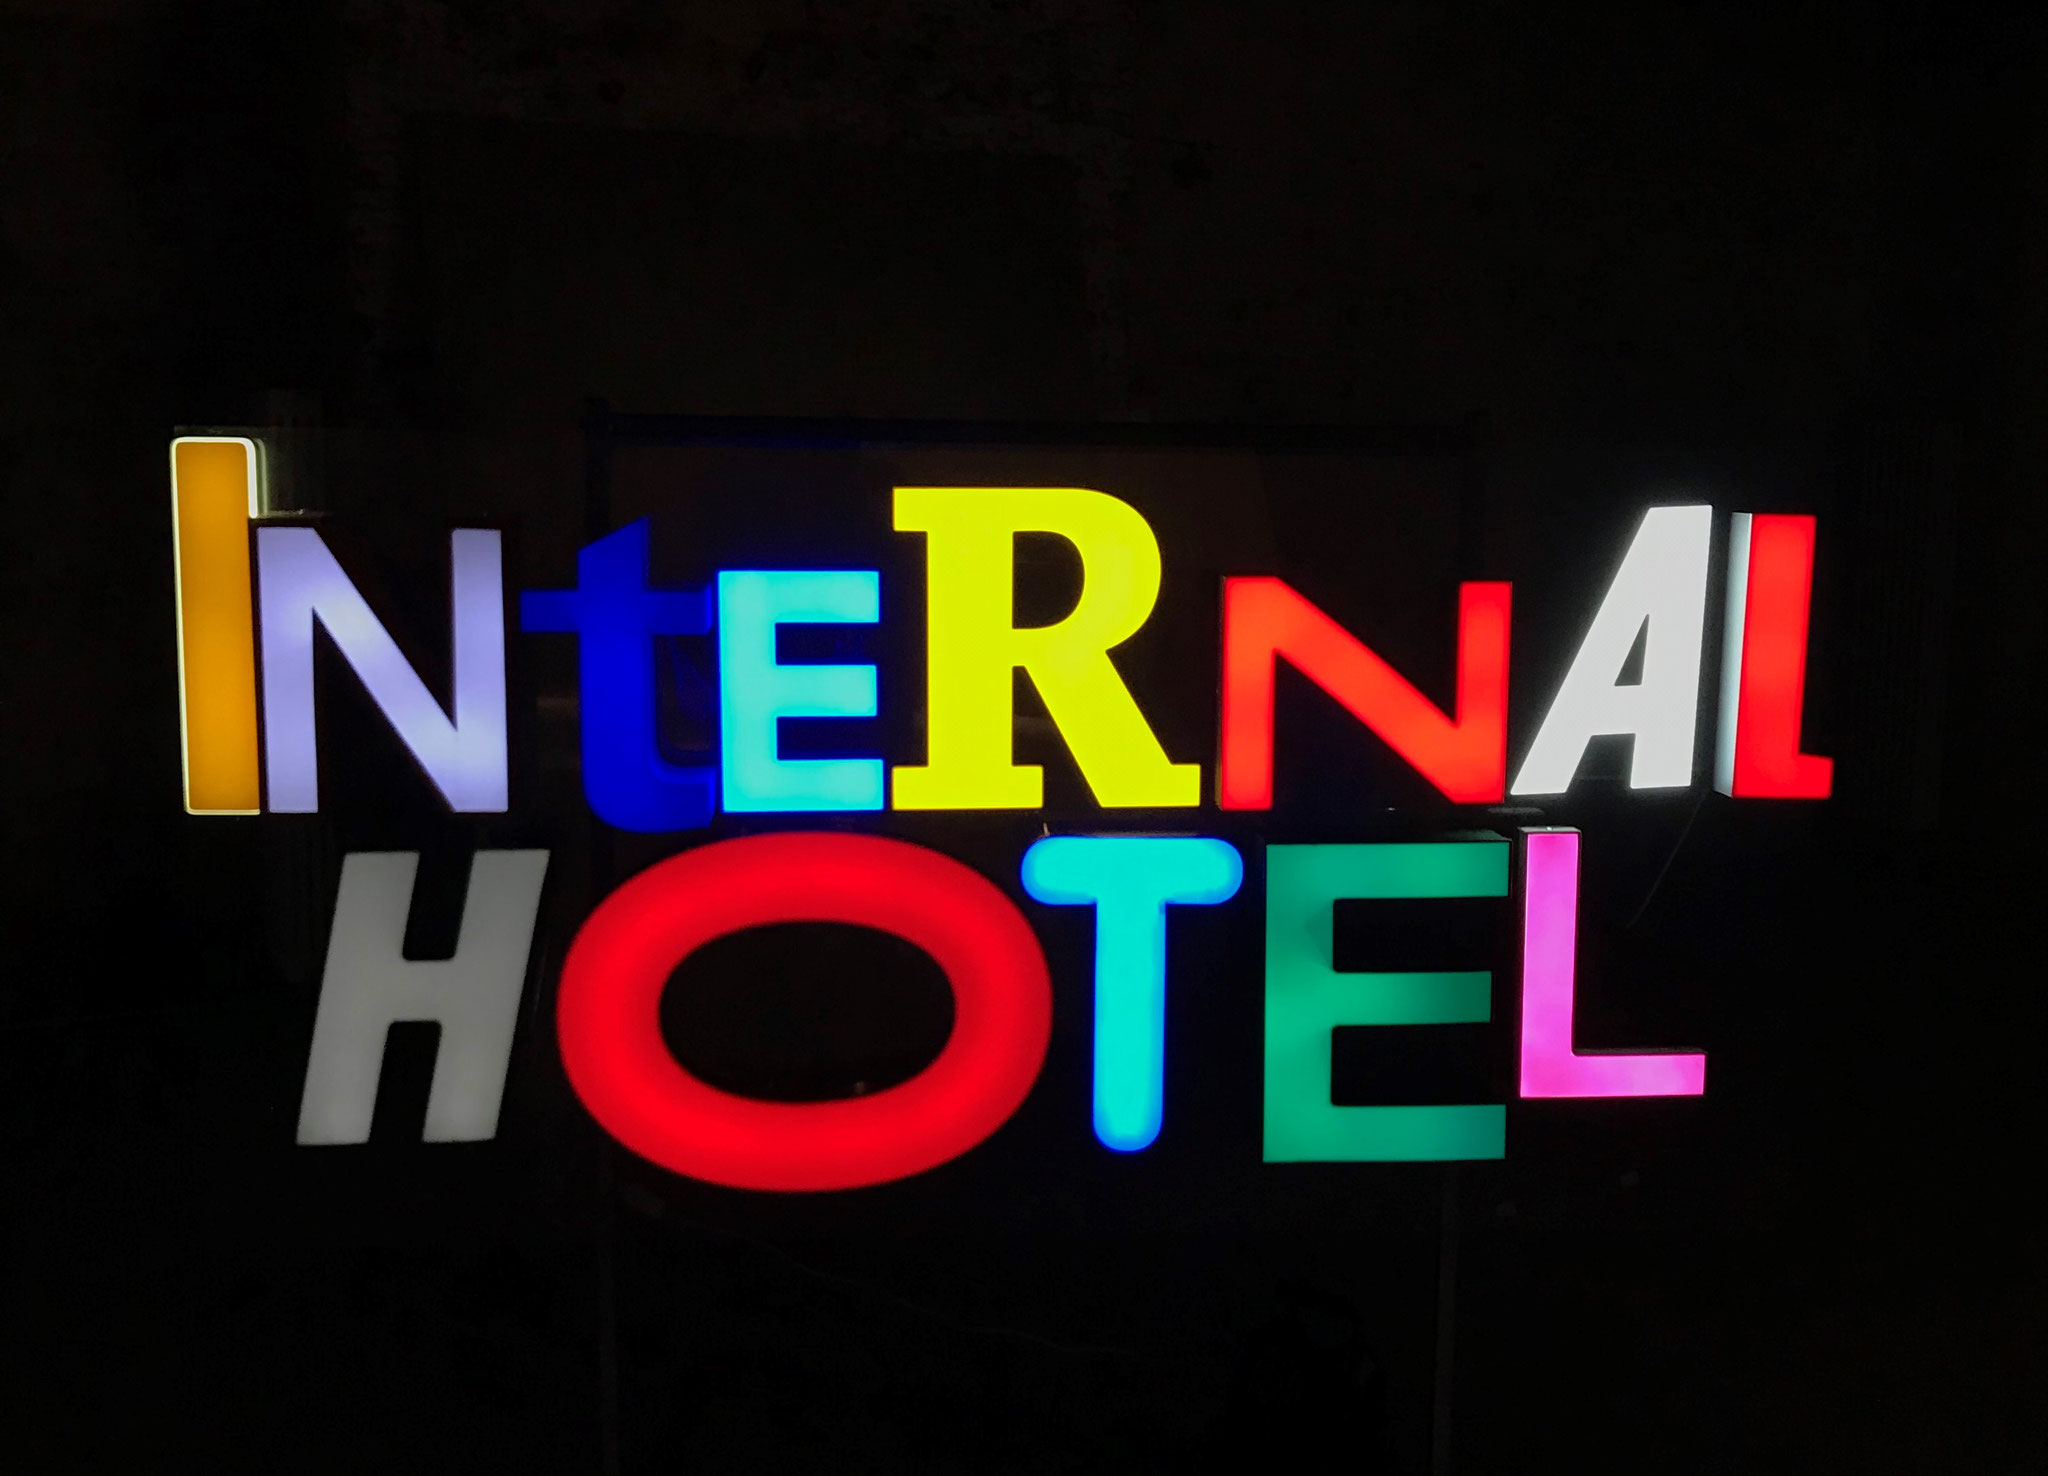 INTERNAL HOTEL, Vintage lighting letters on acrylic plate, 100 x 200 cm, 2019 (Installation view: Solo show INTERNAL HOTEL, Ho Gallery, Vienna, Austria / 2019)